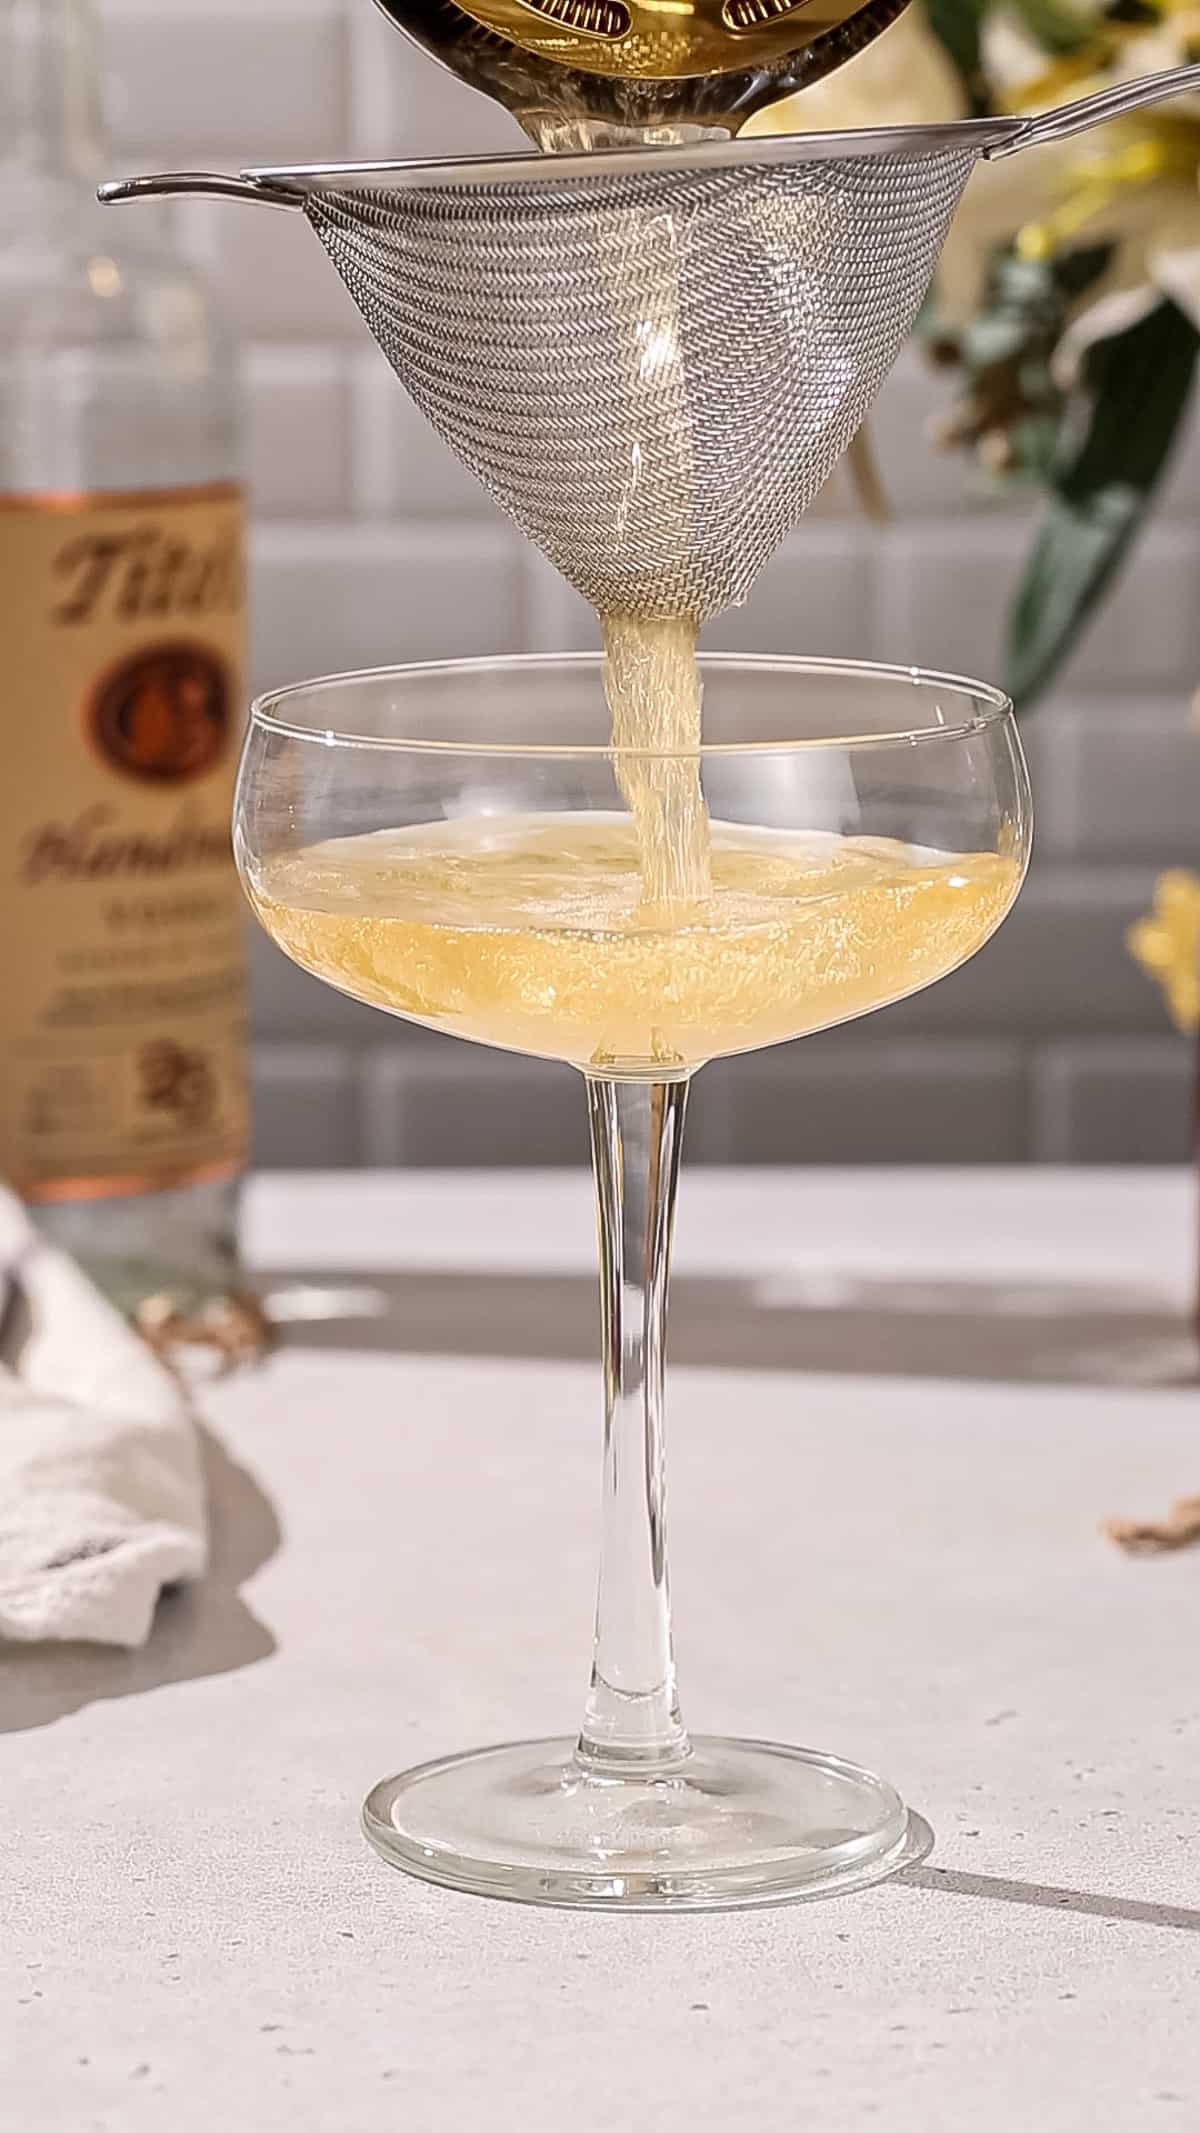 Cocktail being poured into a coupe glass through a regular strainer and a fine mesh strainer.